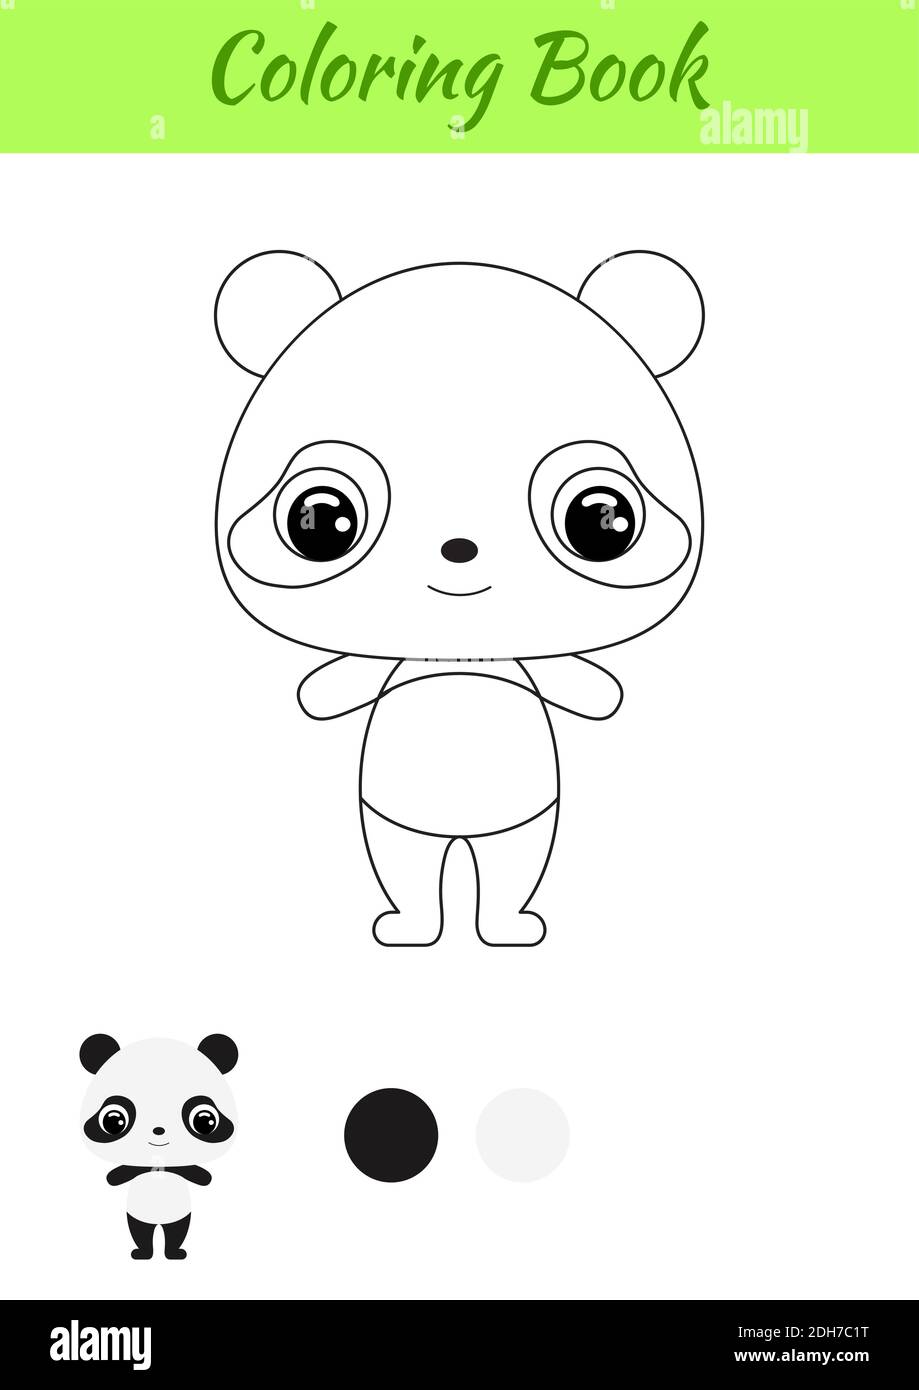 Coloring book little baby panda coloring page for kids educational activity for preschool years kids and toddlers with cute animal stock vector image art